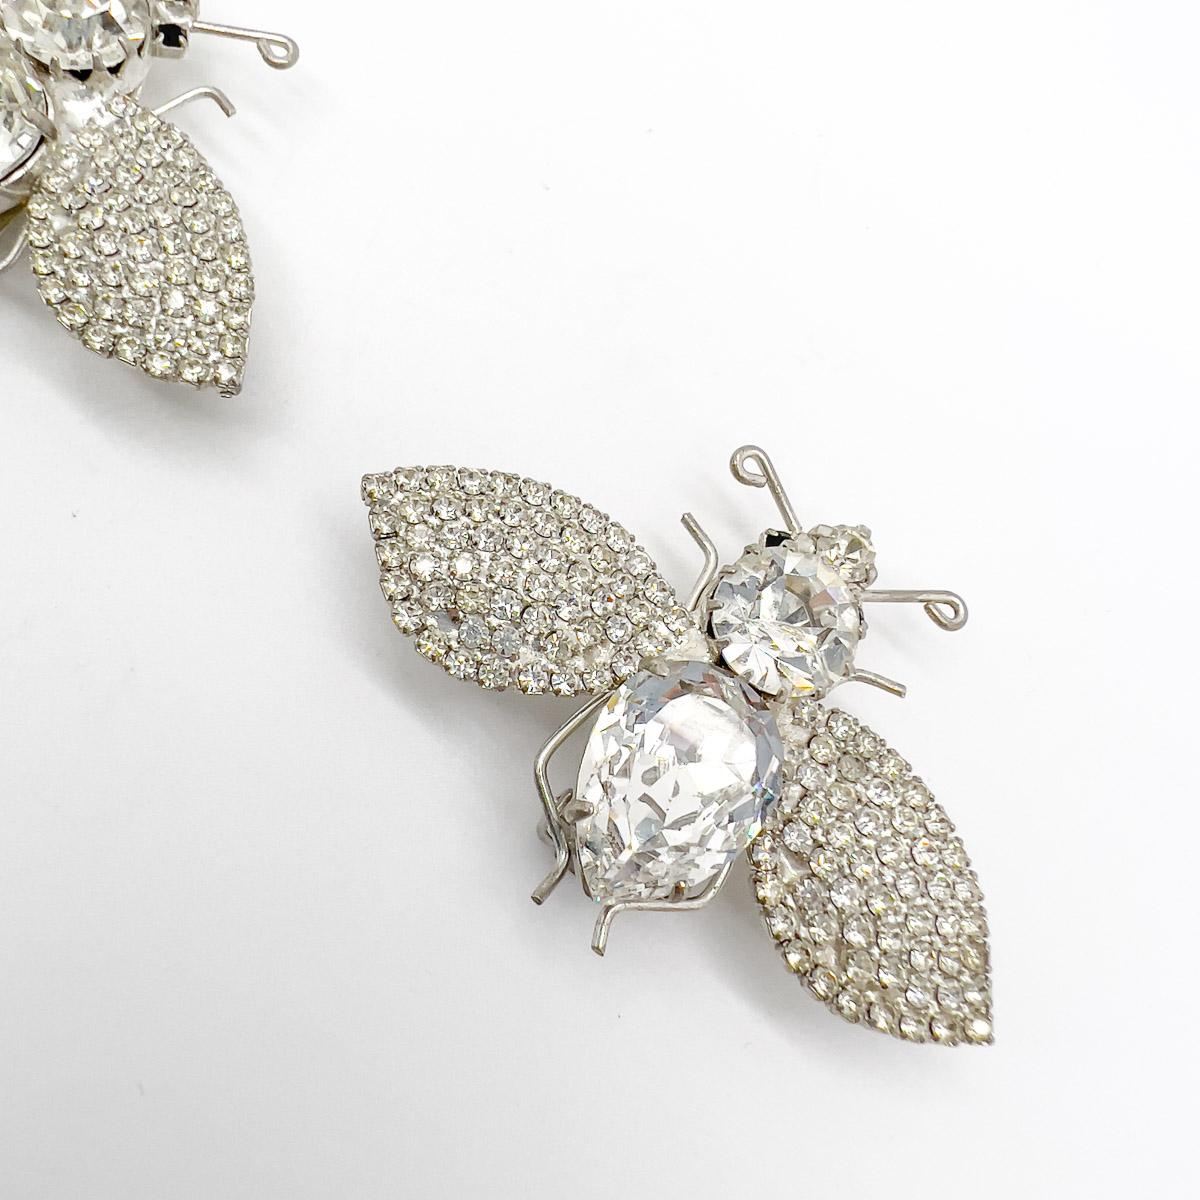 A wondrous pair of Vintage Crystal Bee Earrings with fabulous large fancy cut crystals and pave set chatons. Statement and cool, these beauties will prove a divine finishing touch for your look.
An unsigned beauty. A rare treasure. Just because a